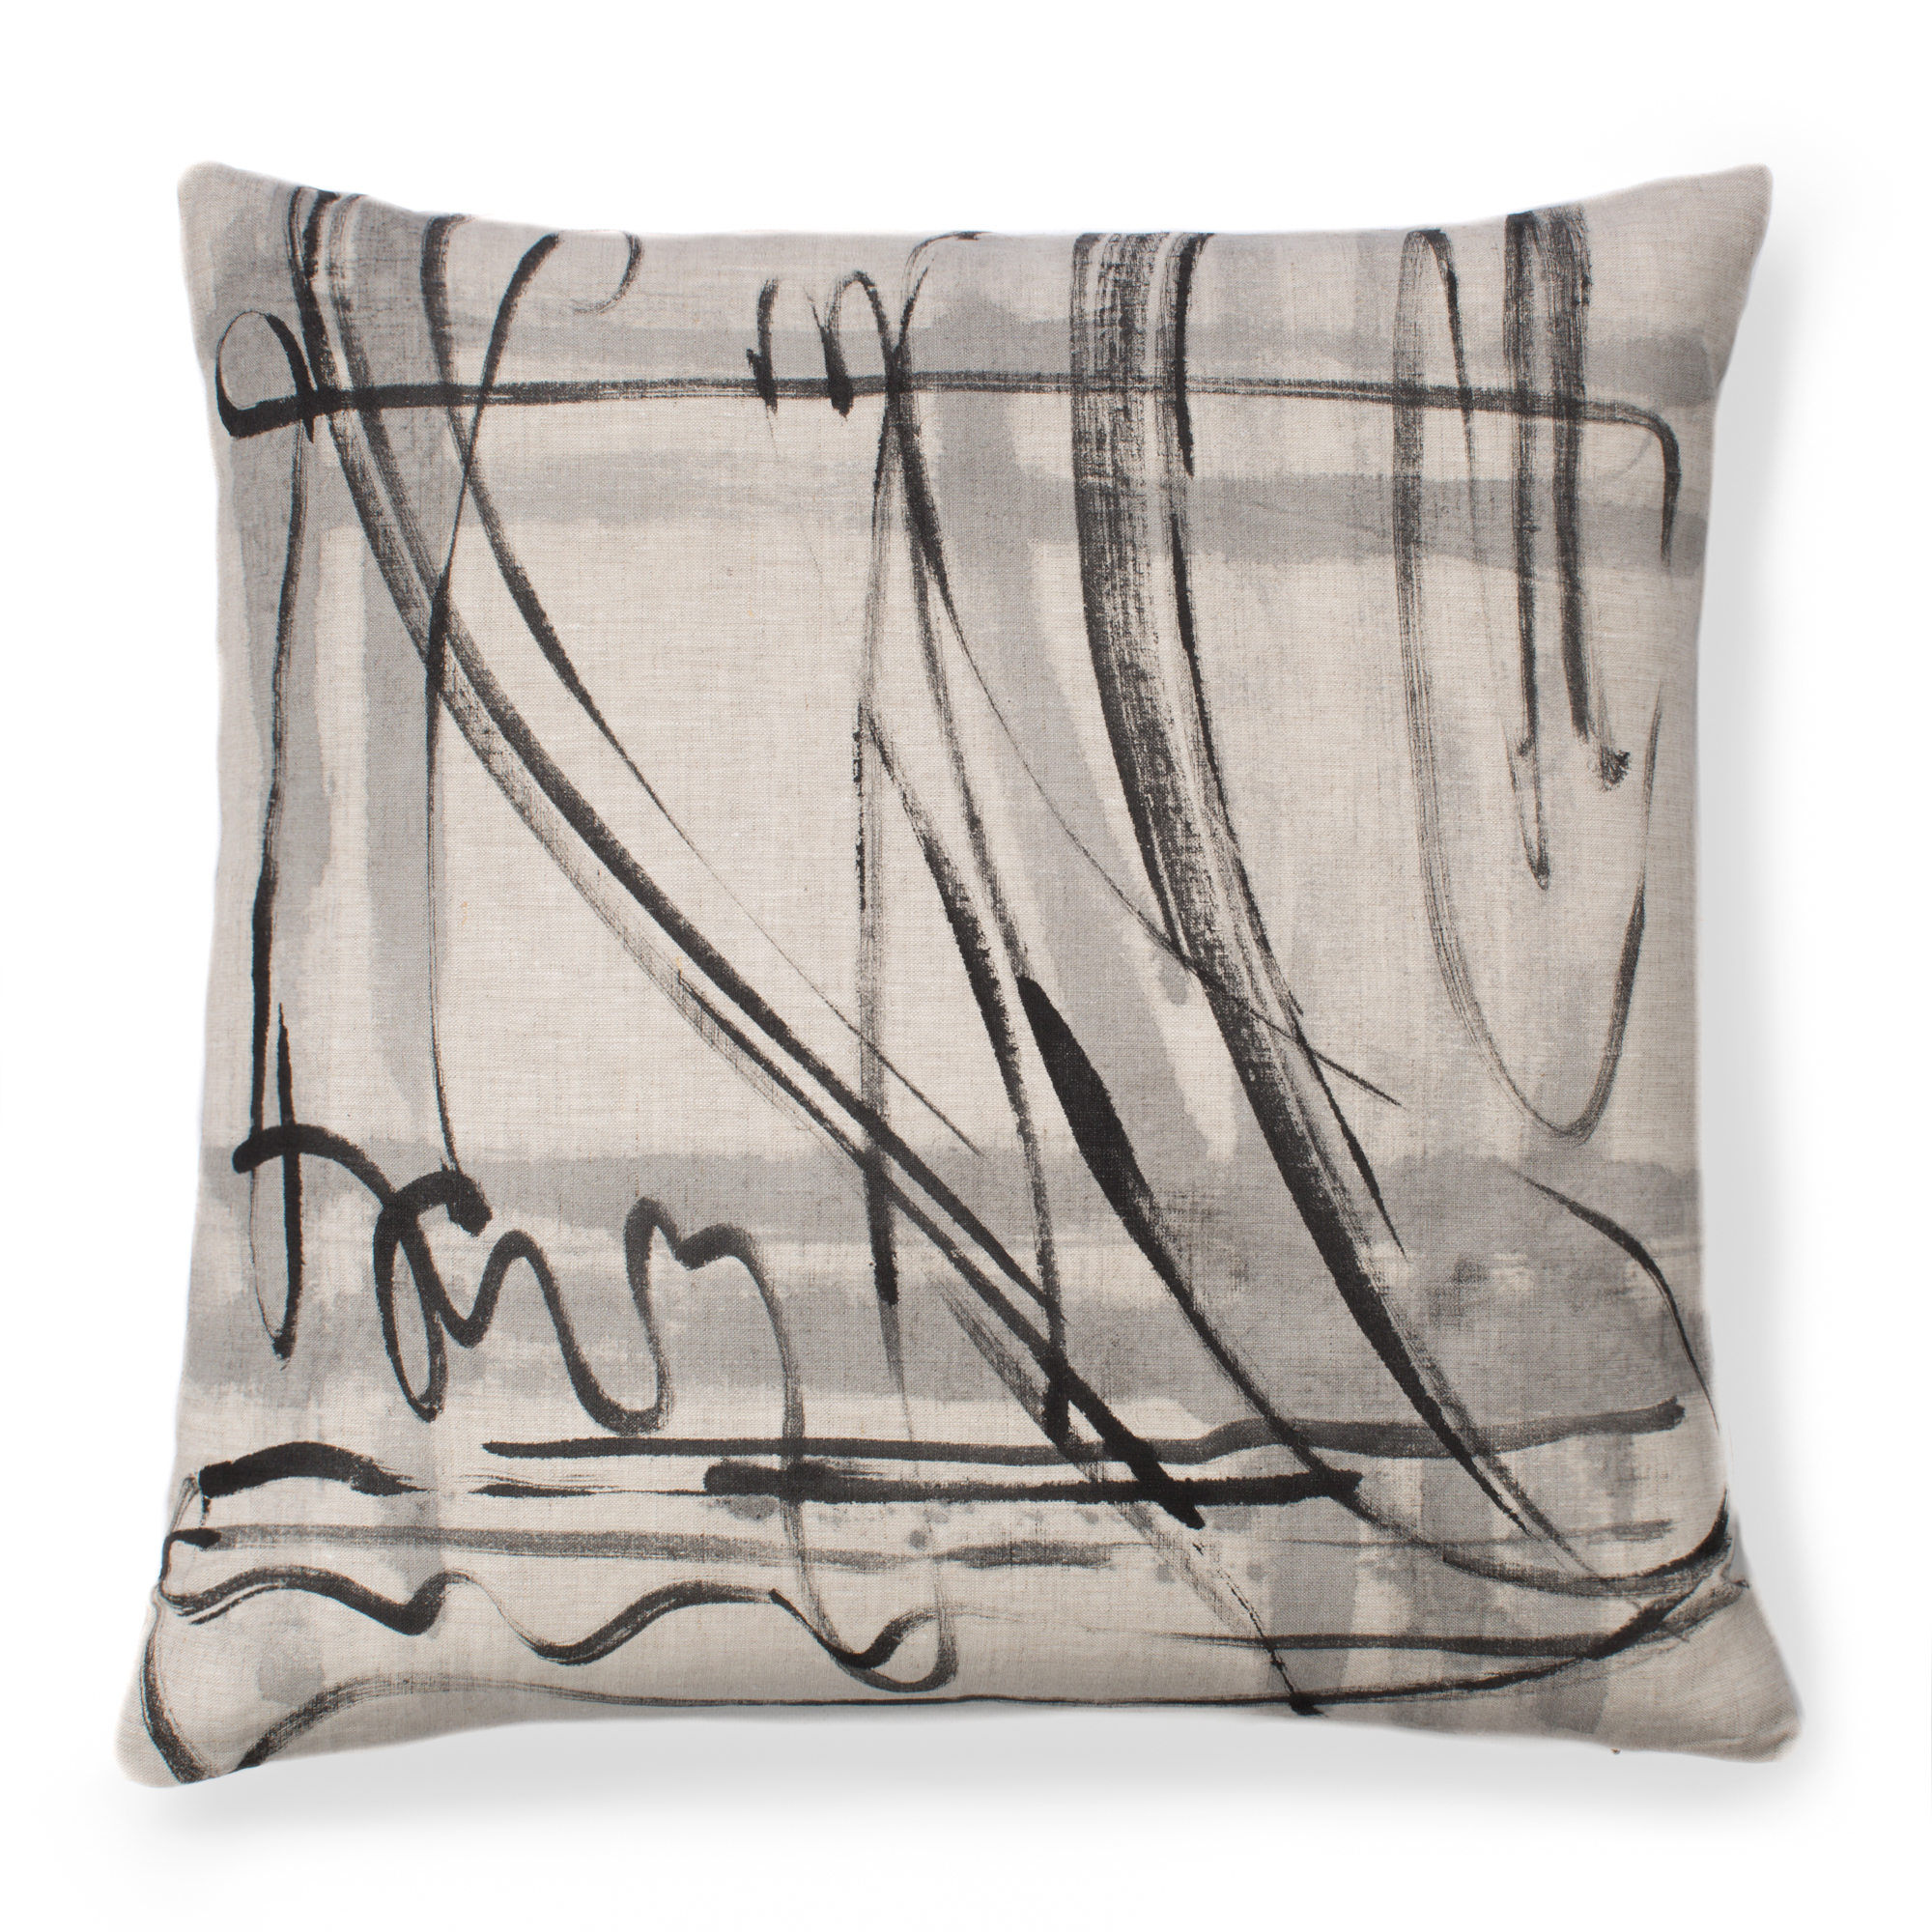 AbstractPillowFinished-3.jpg